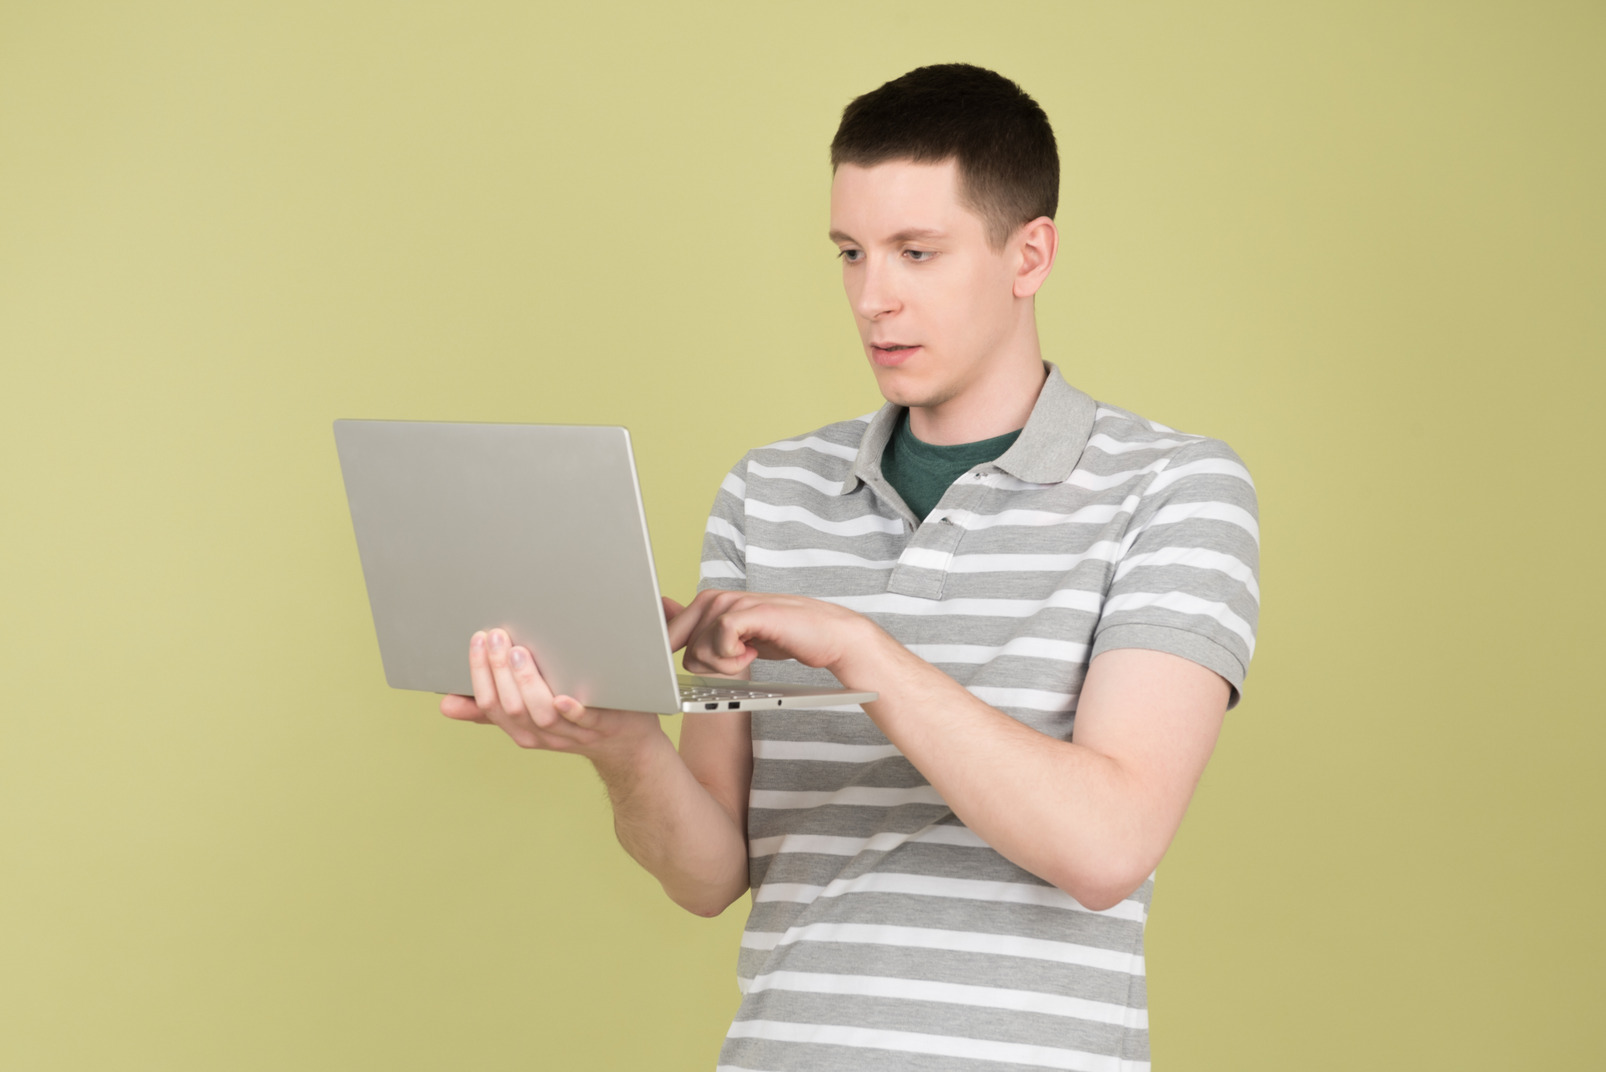 Young man holding a laptop